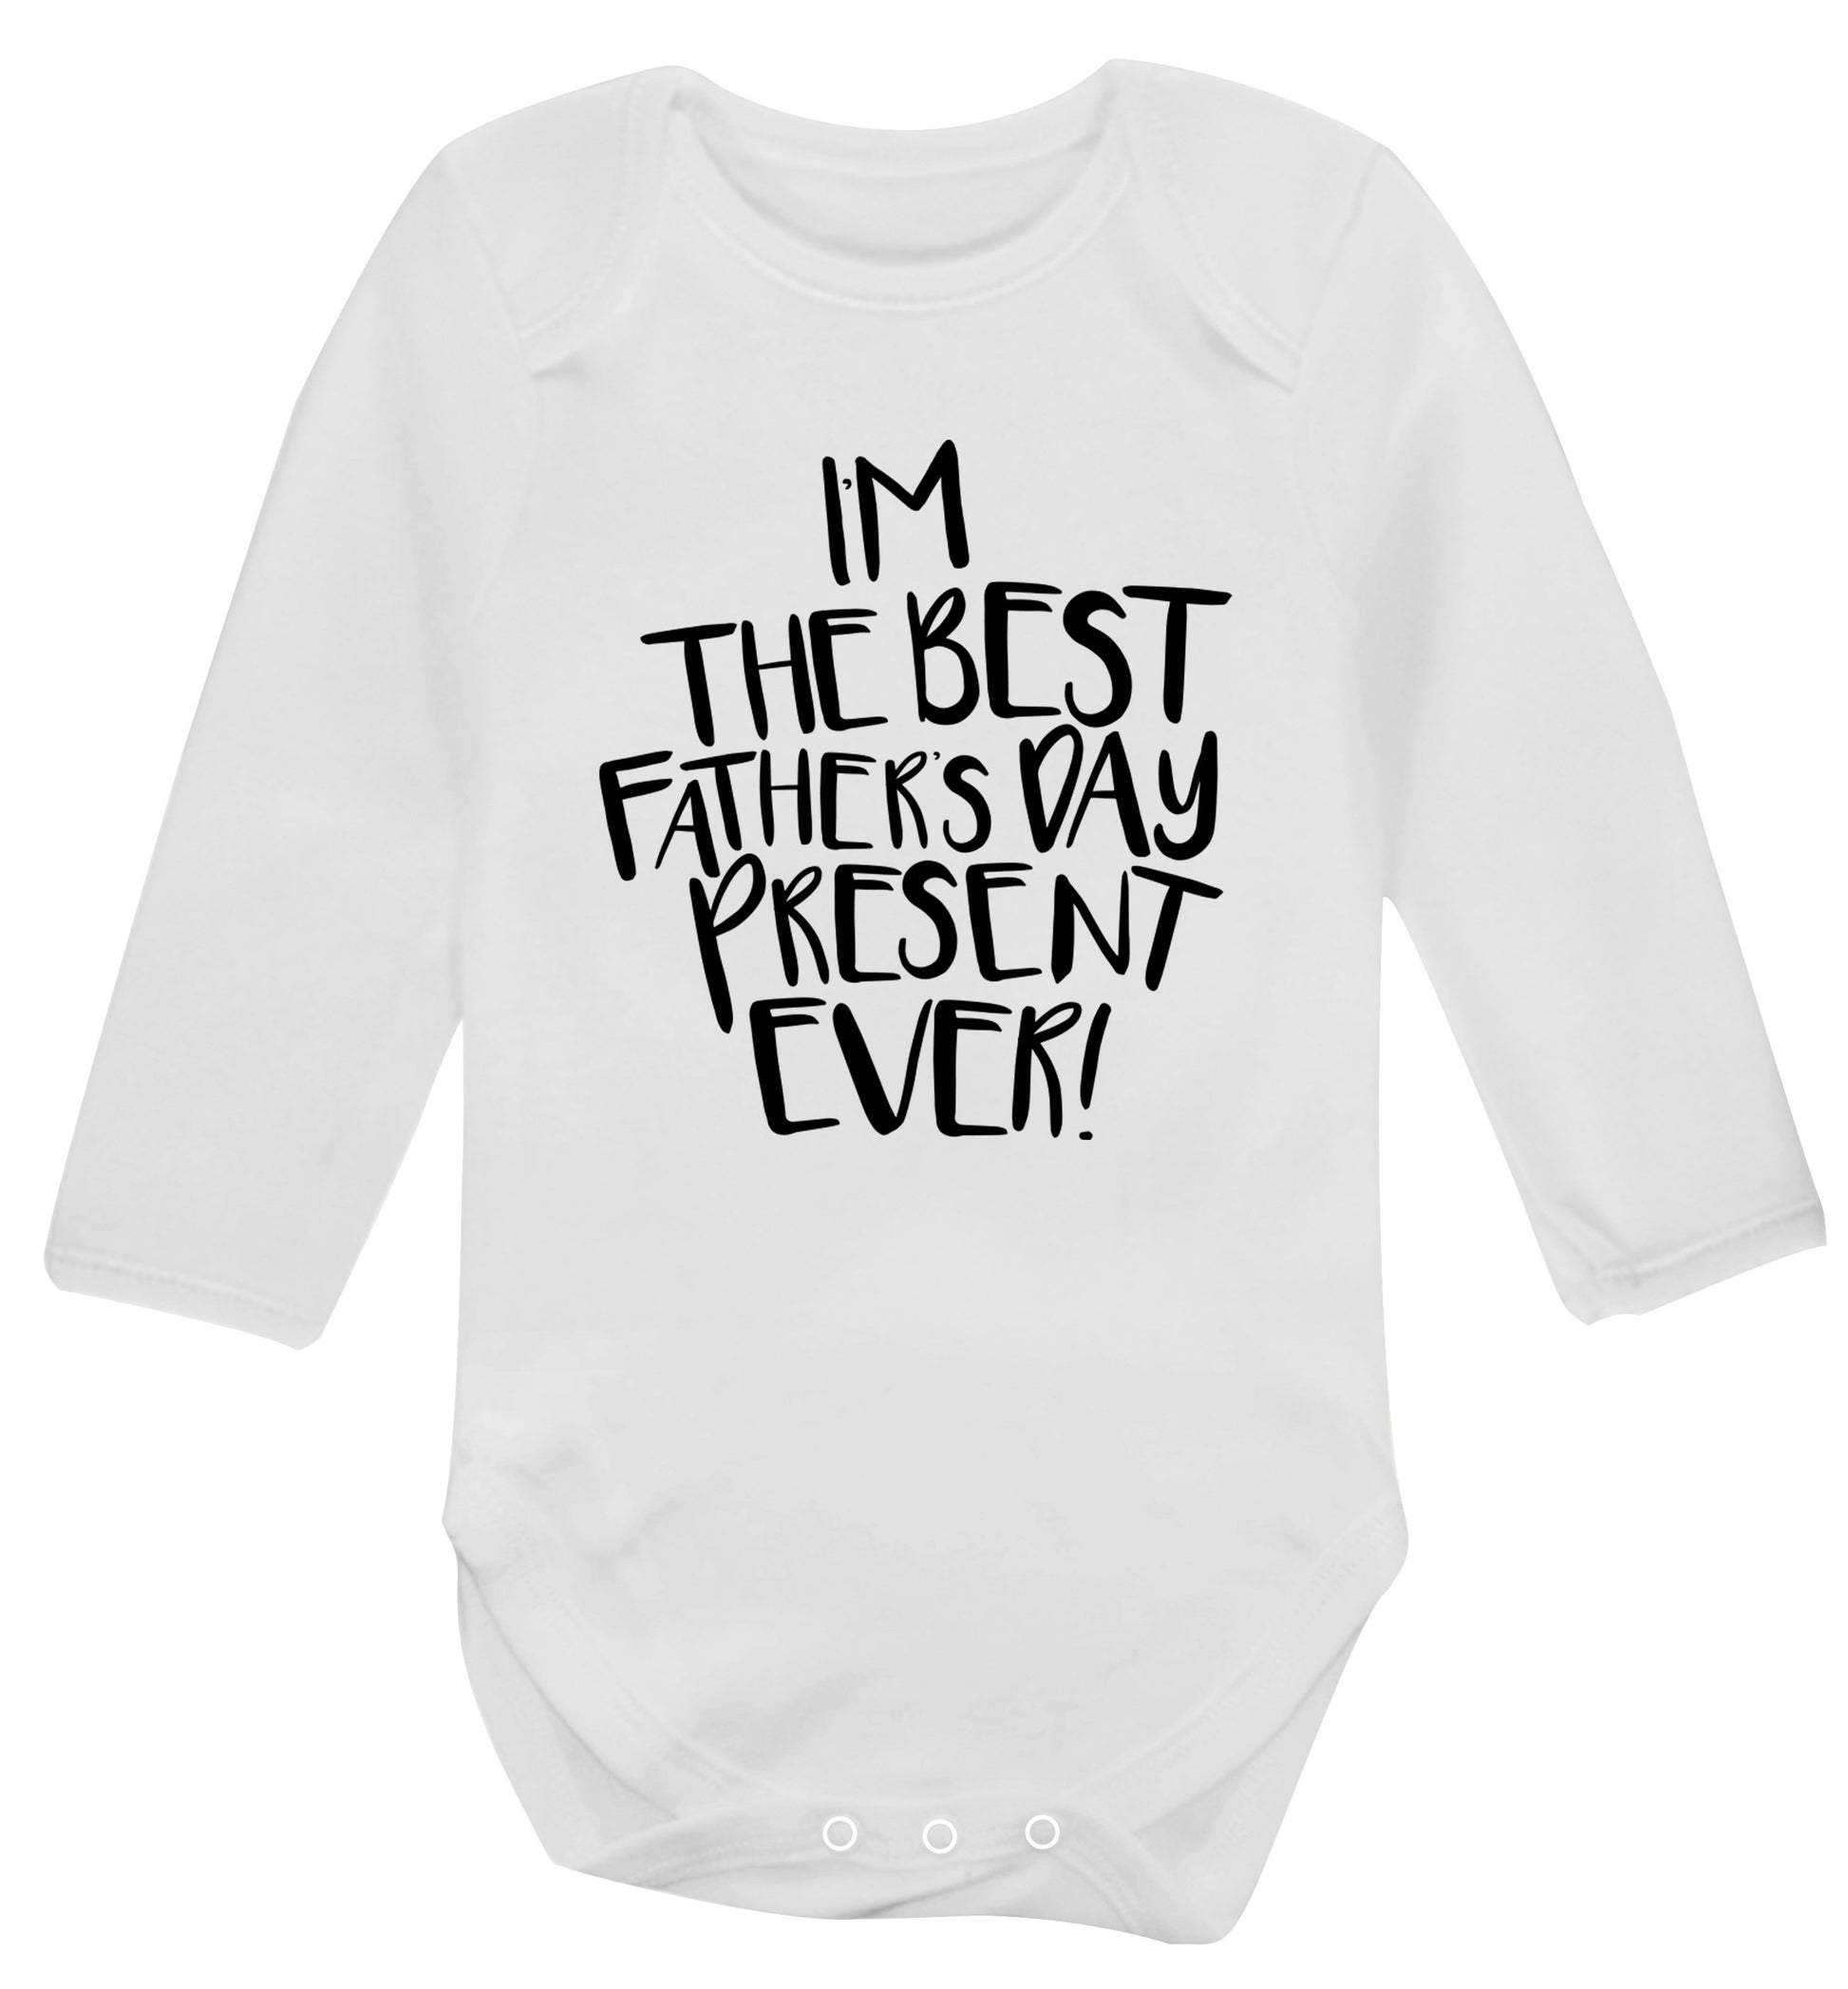 I'm the best father's day present ever! Baby Vest long sleeved white 6-12 months